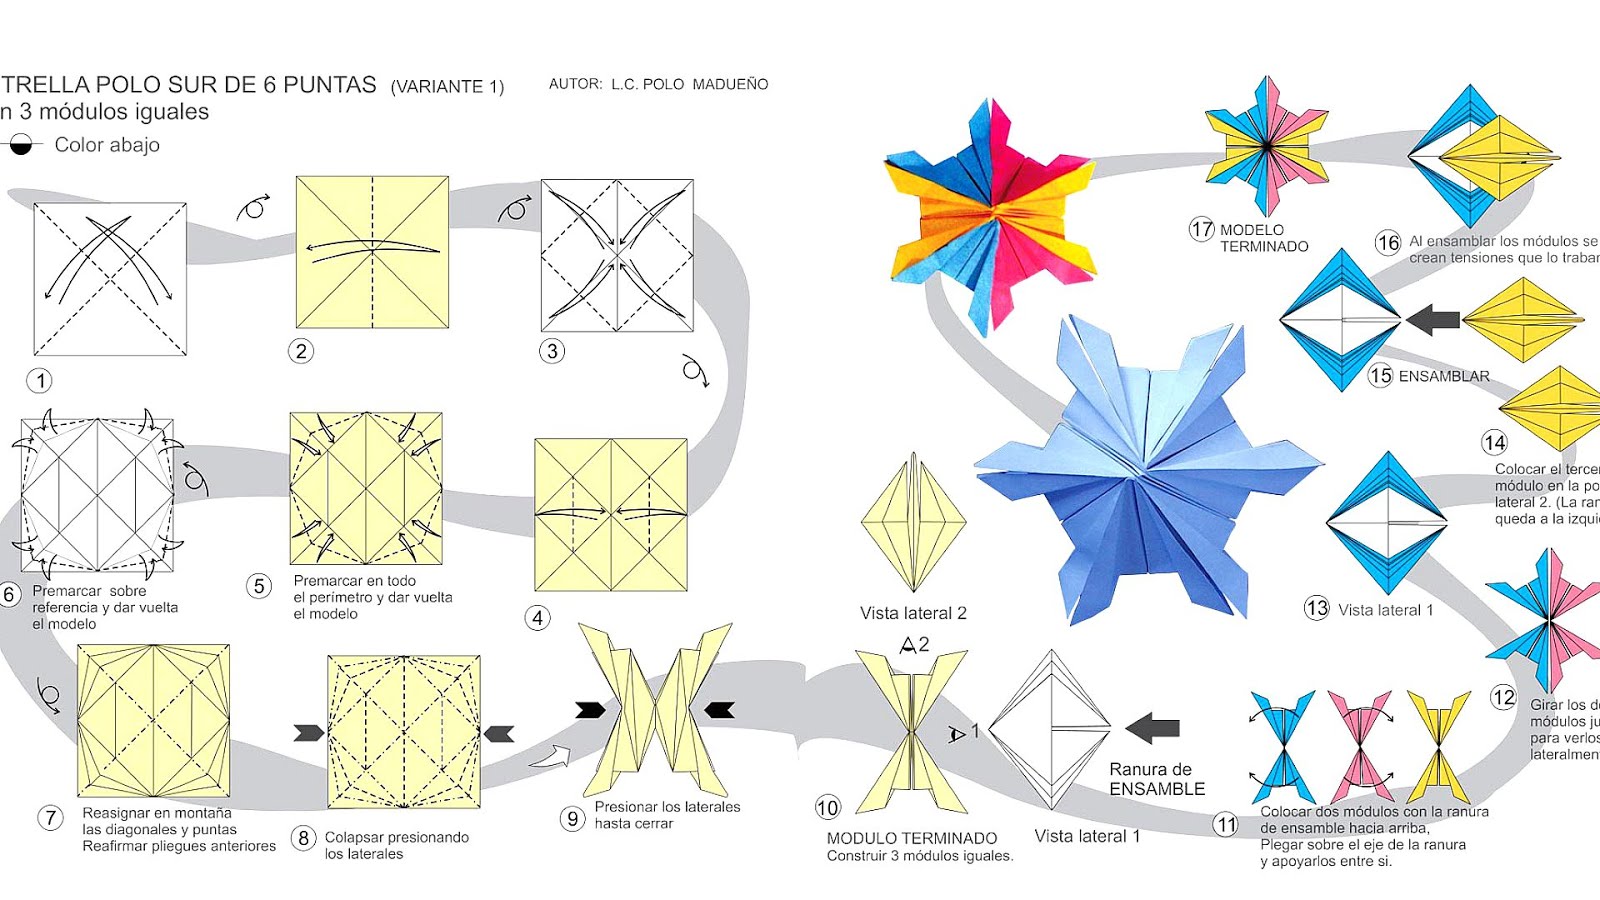 modular origami projects